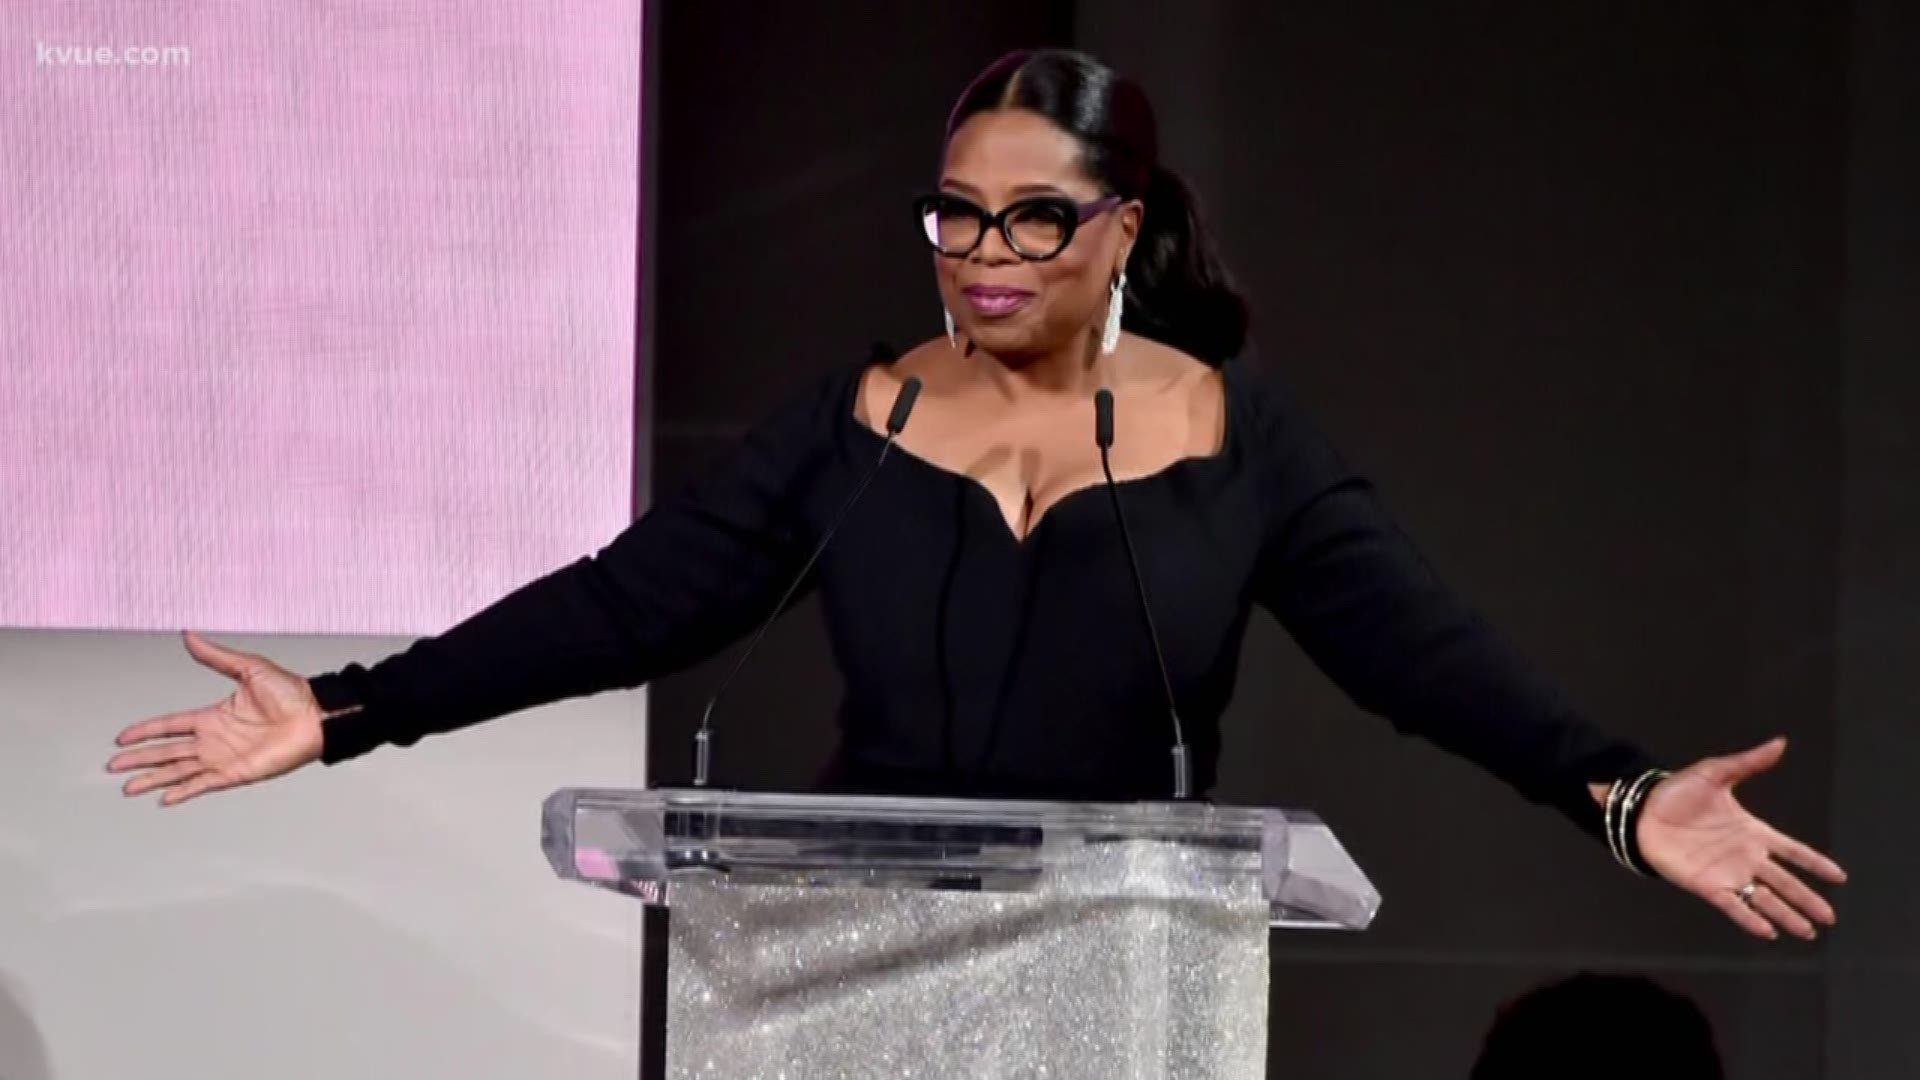 A restaurant chain here in Austin could see a boost in business thanks to Oprah Winfrey.